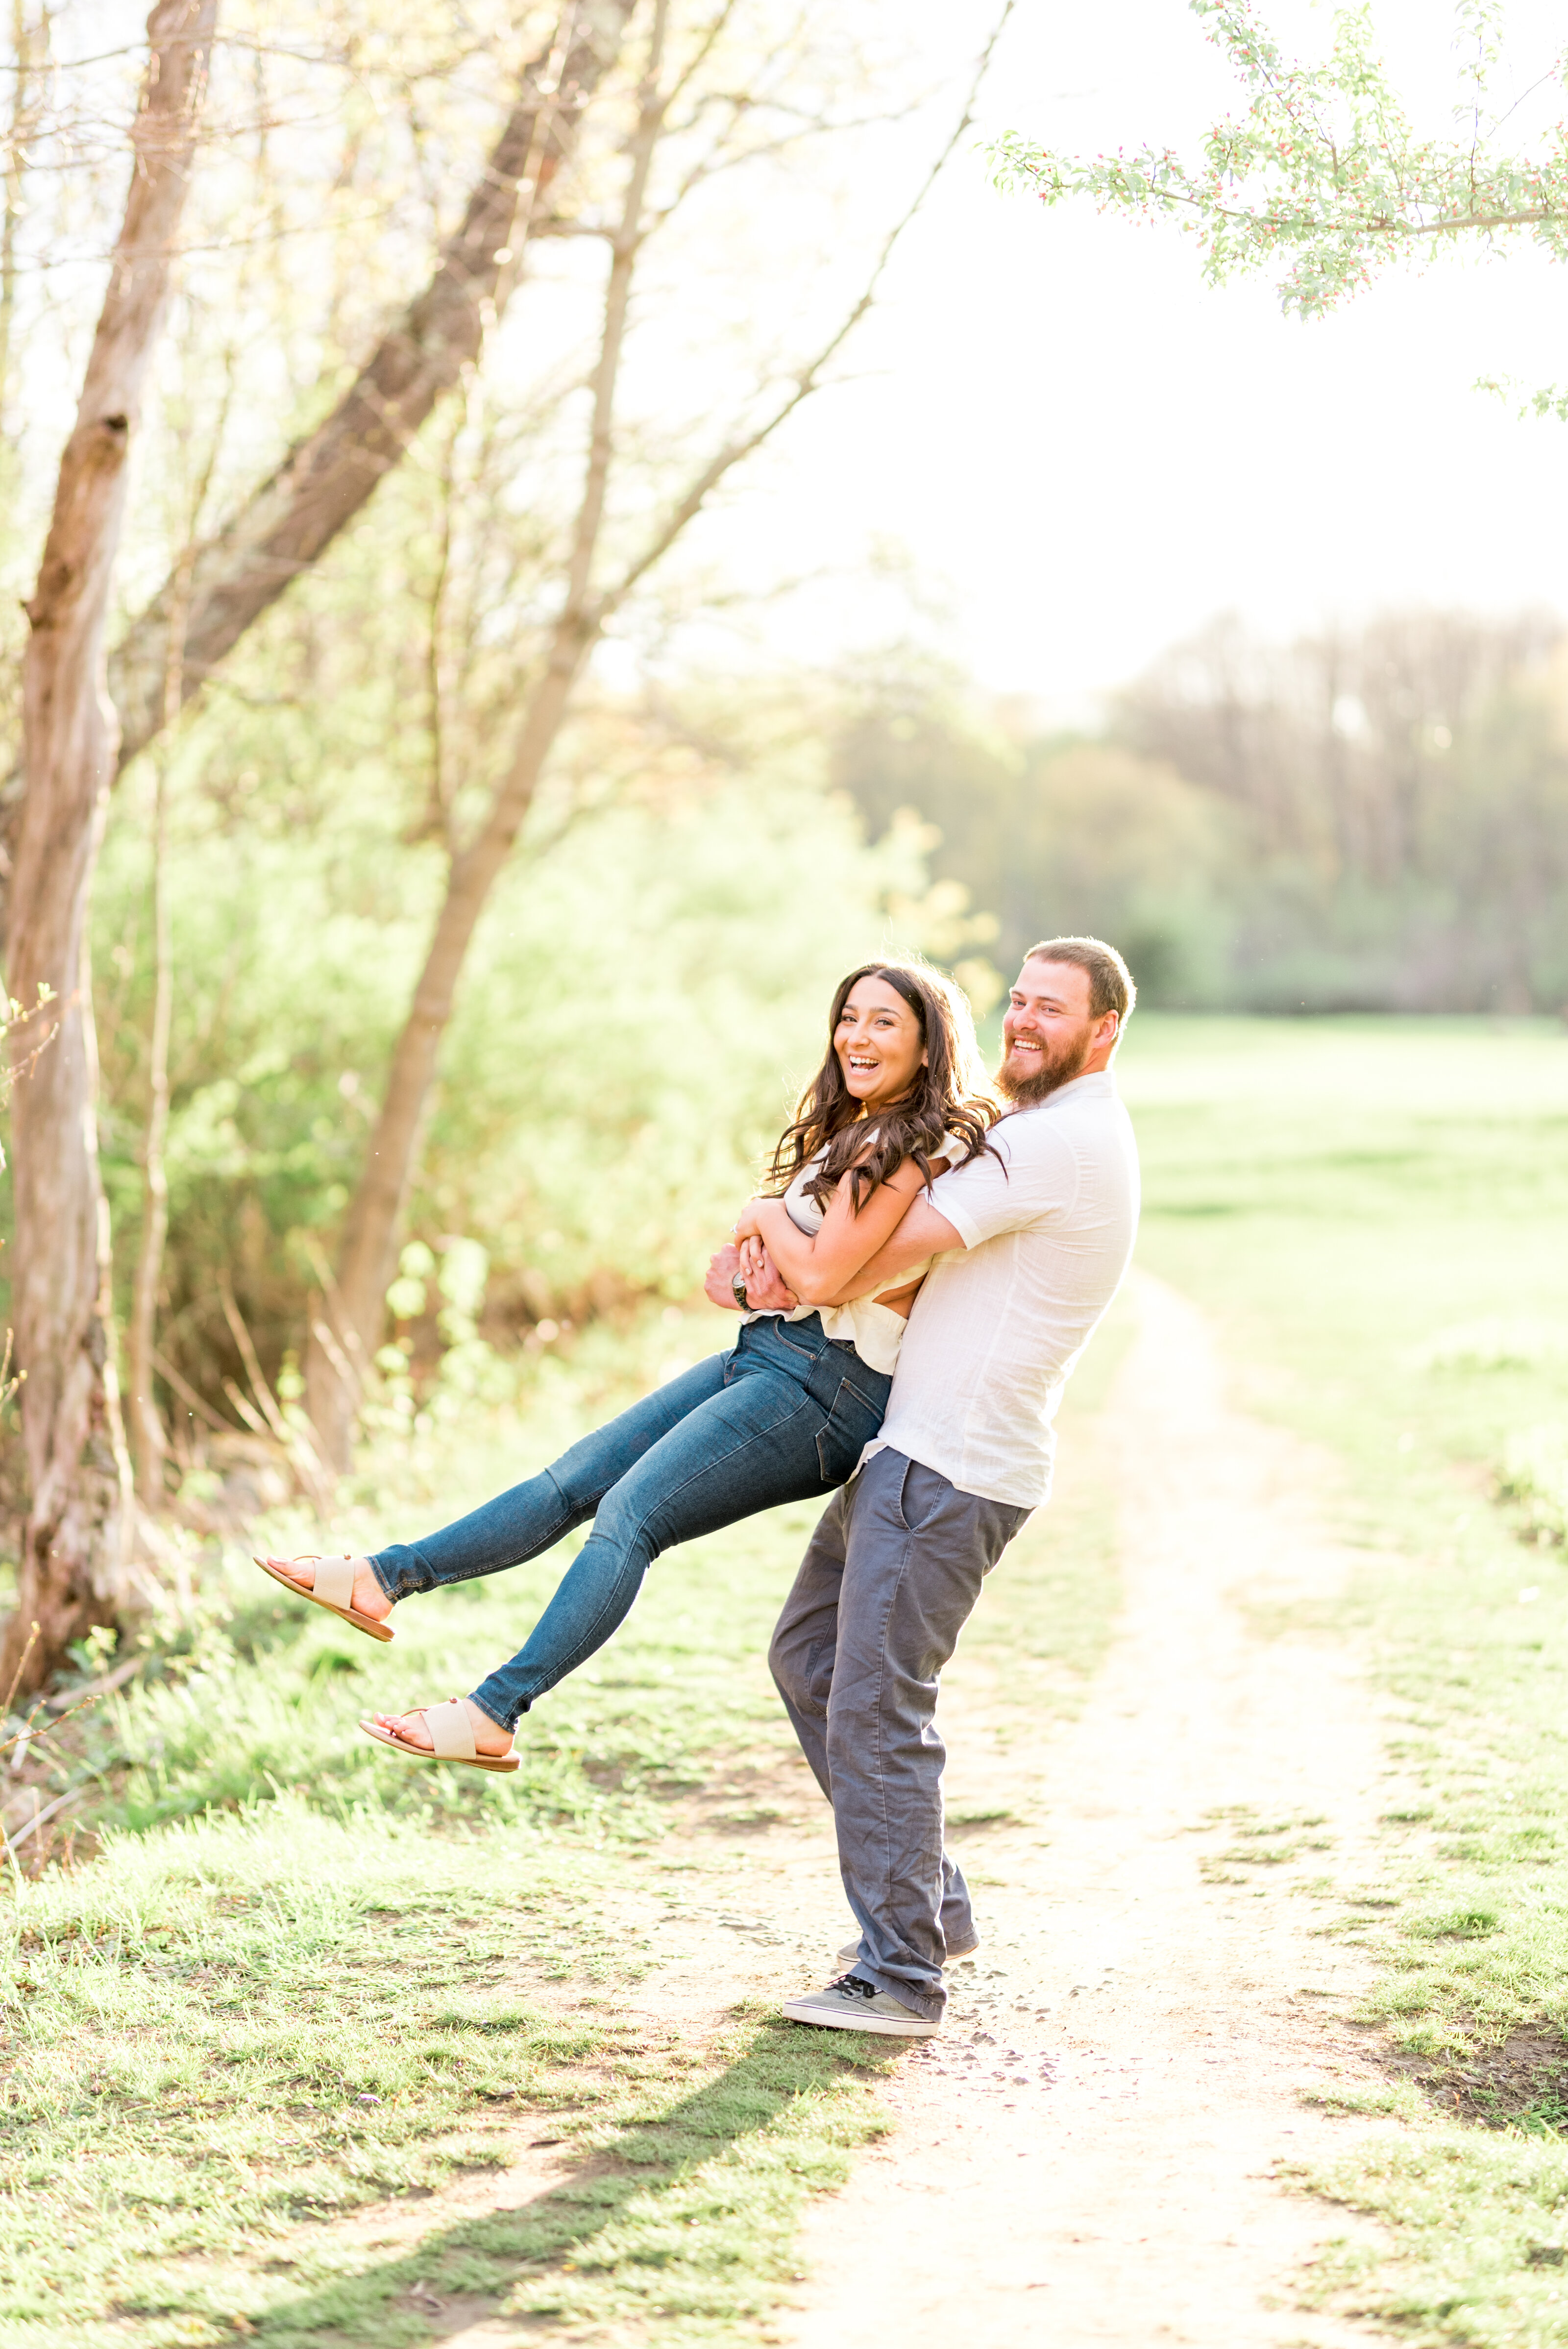 Playful Engagement Picture